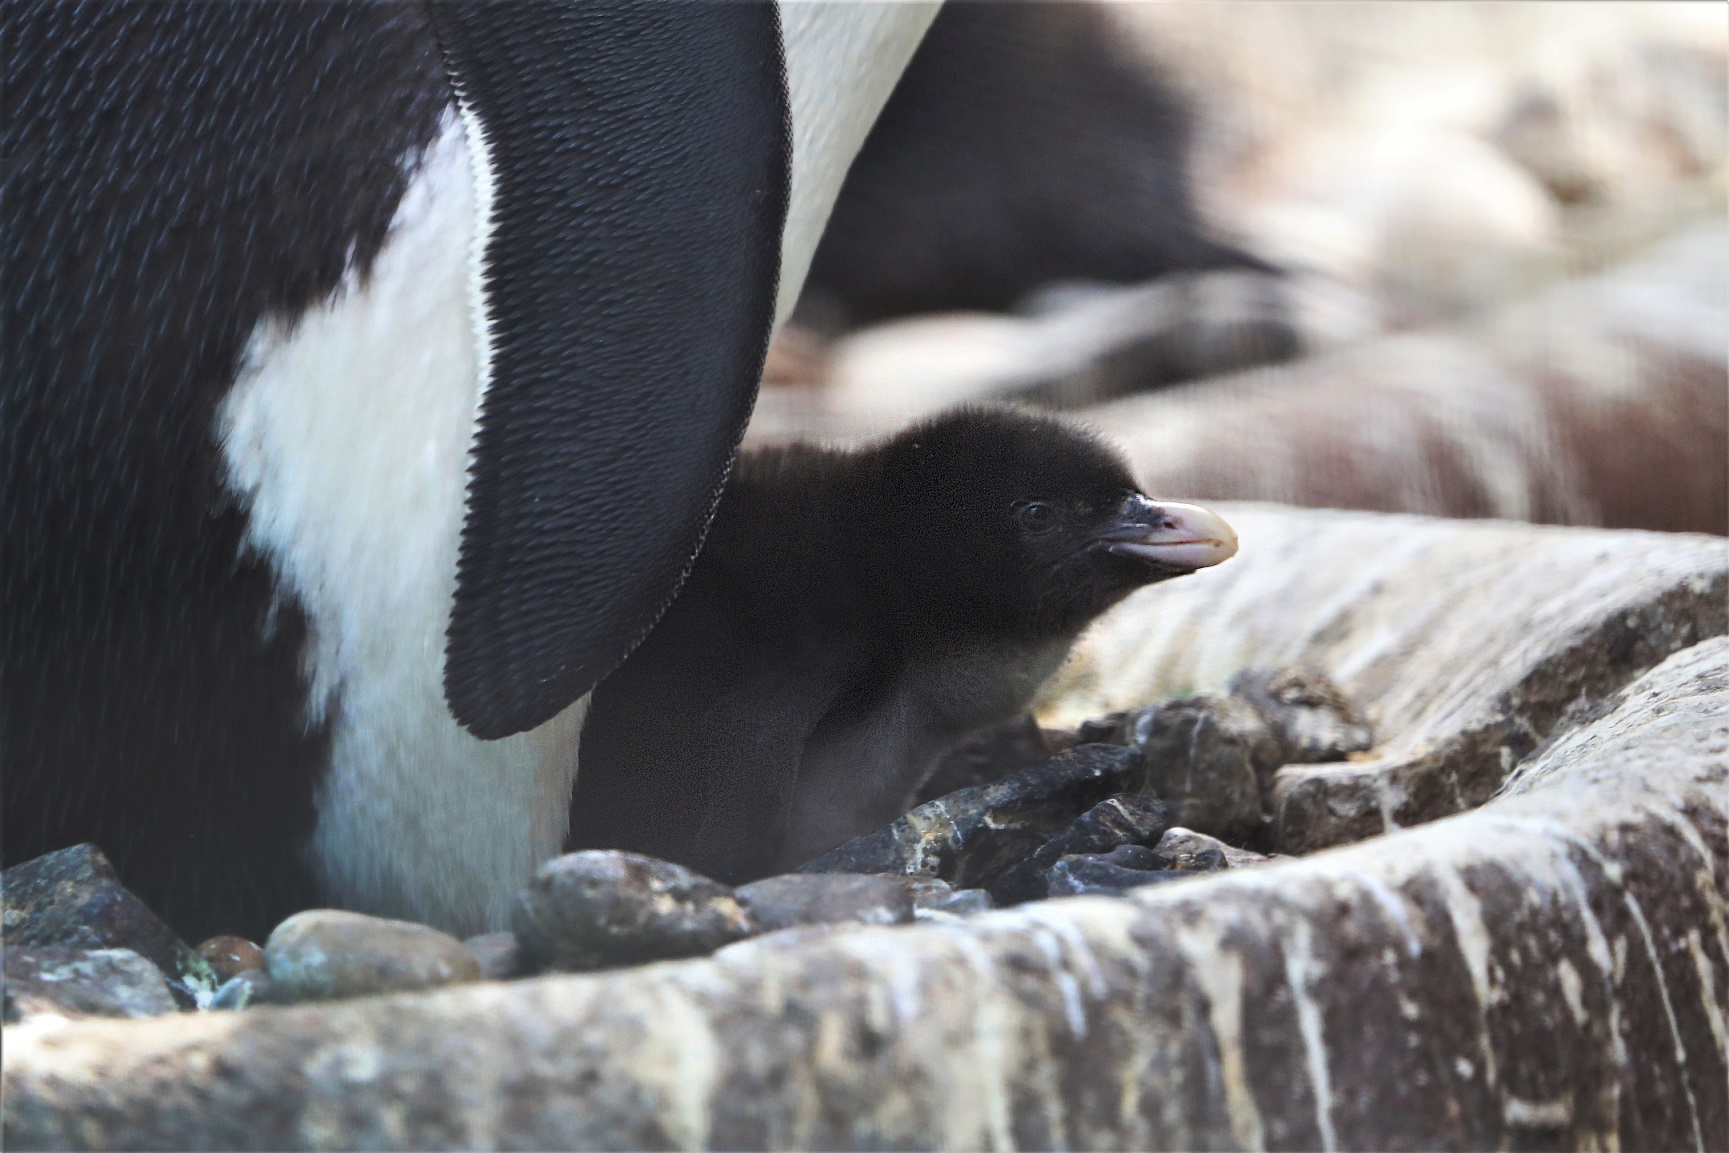 A northern rockhopper chick and parent Pinhead

IMAGES: Amy Middleton 2023